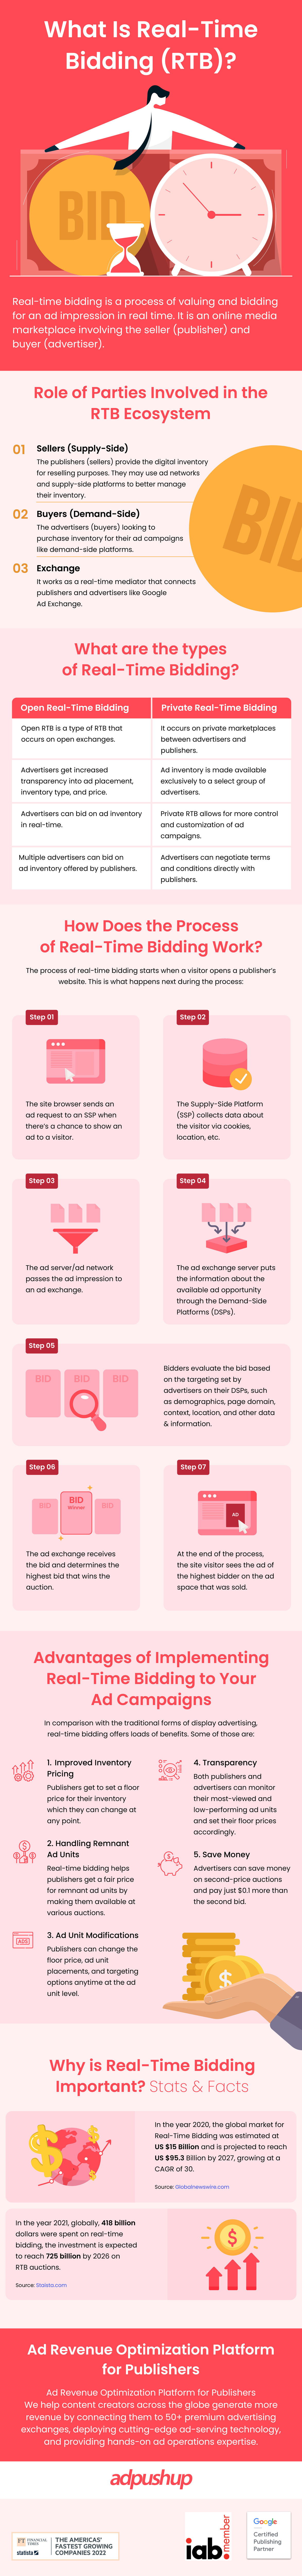 Real time bidding infographic